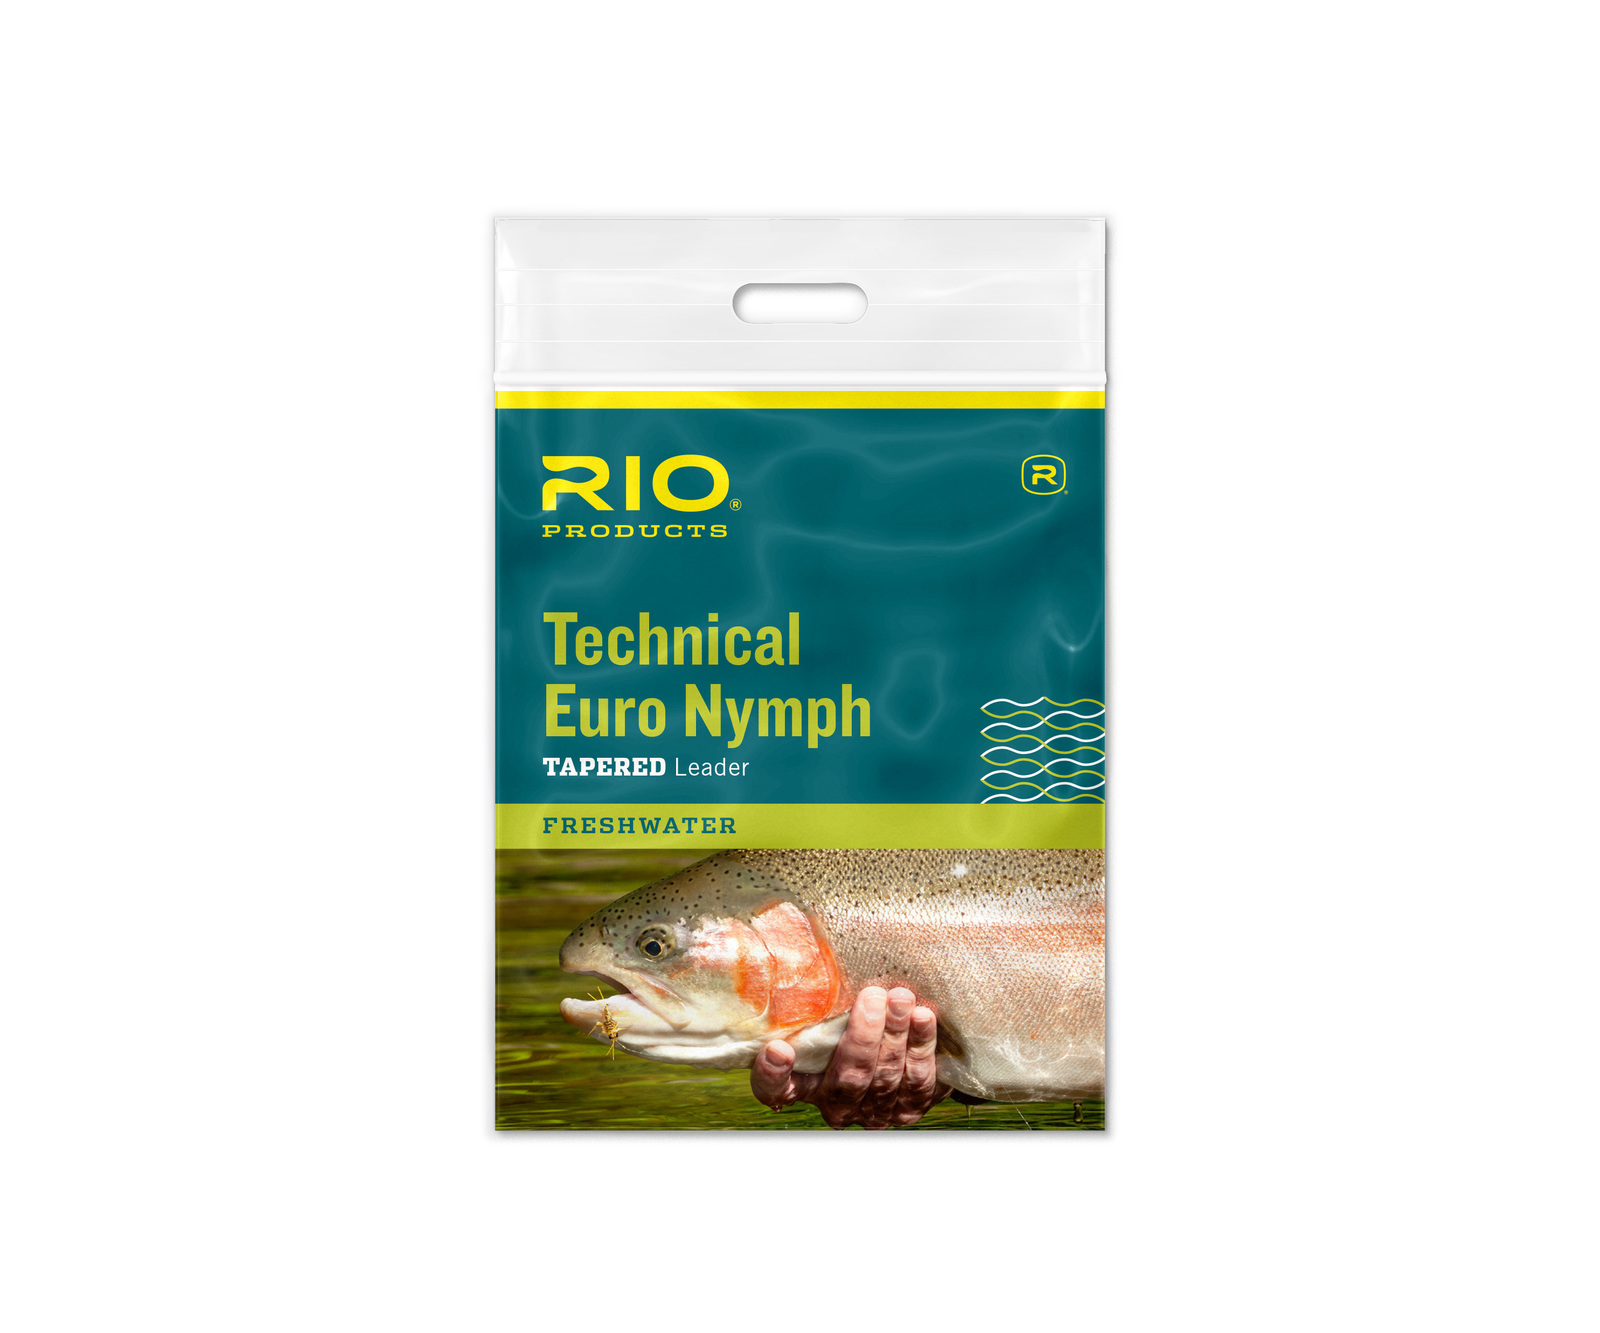 Rio Freshwater Leader Technical Euro Nymph